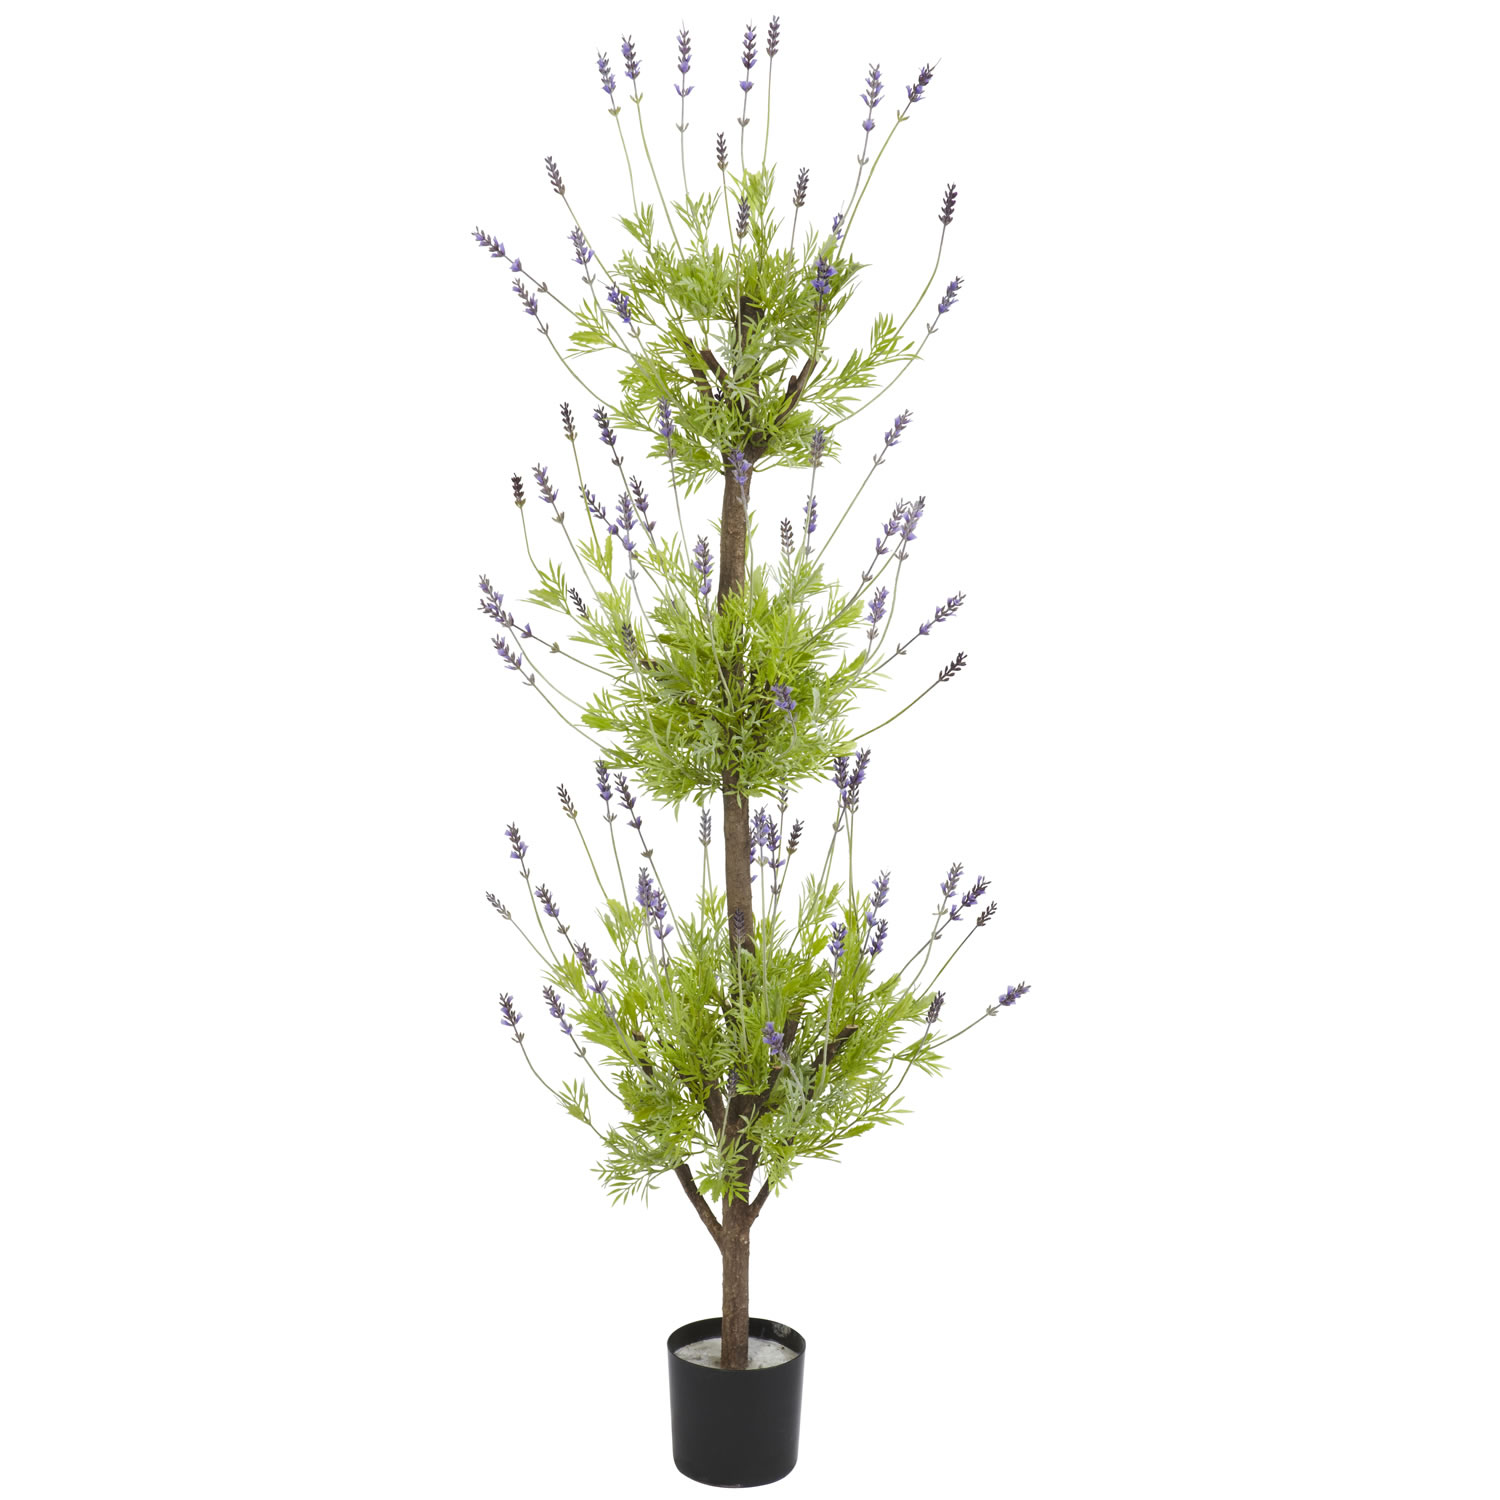 4 Foot Lavender Topiary Tree: Potted